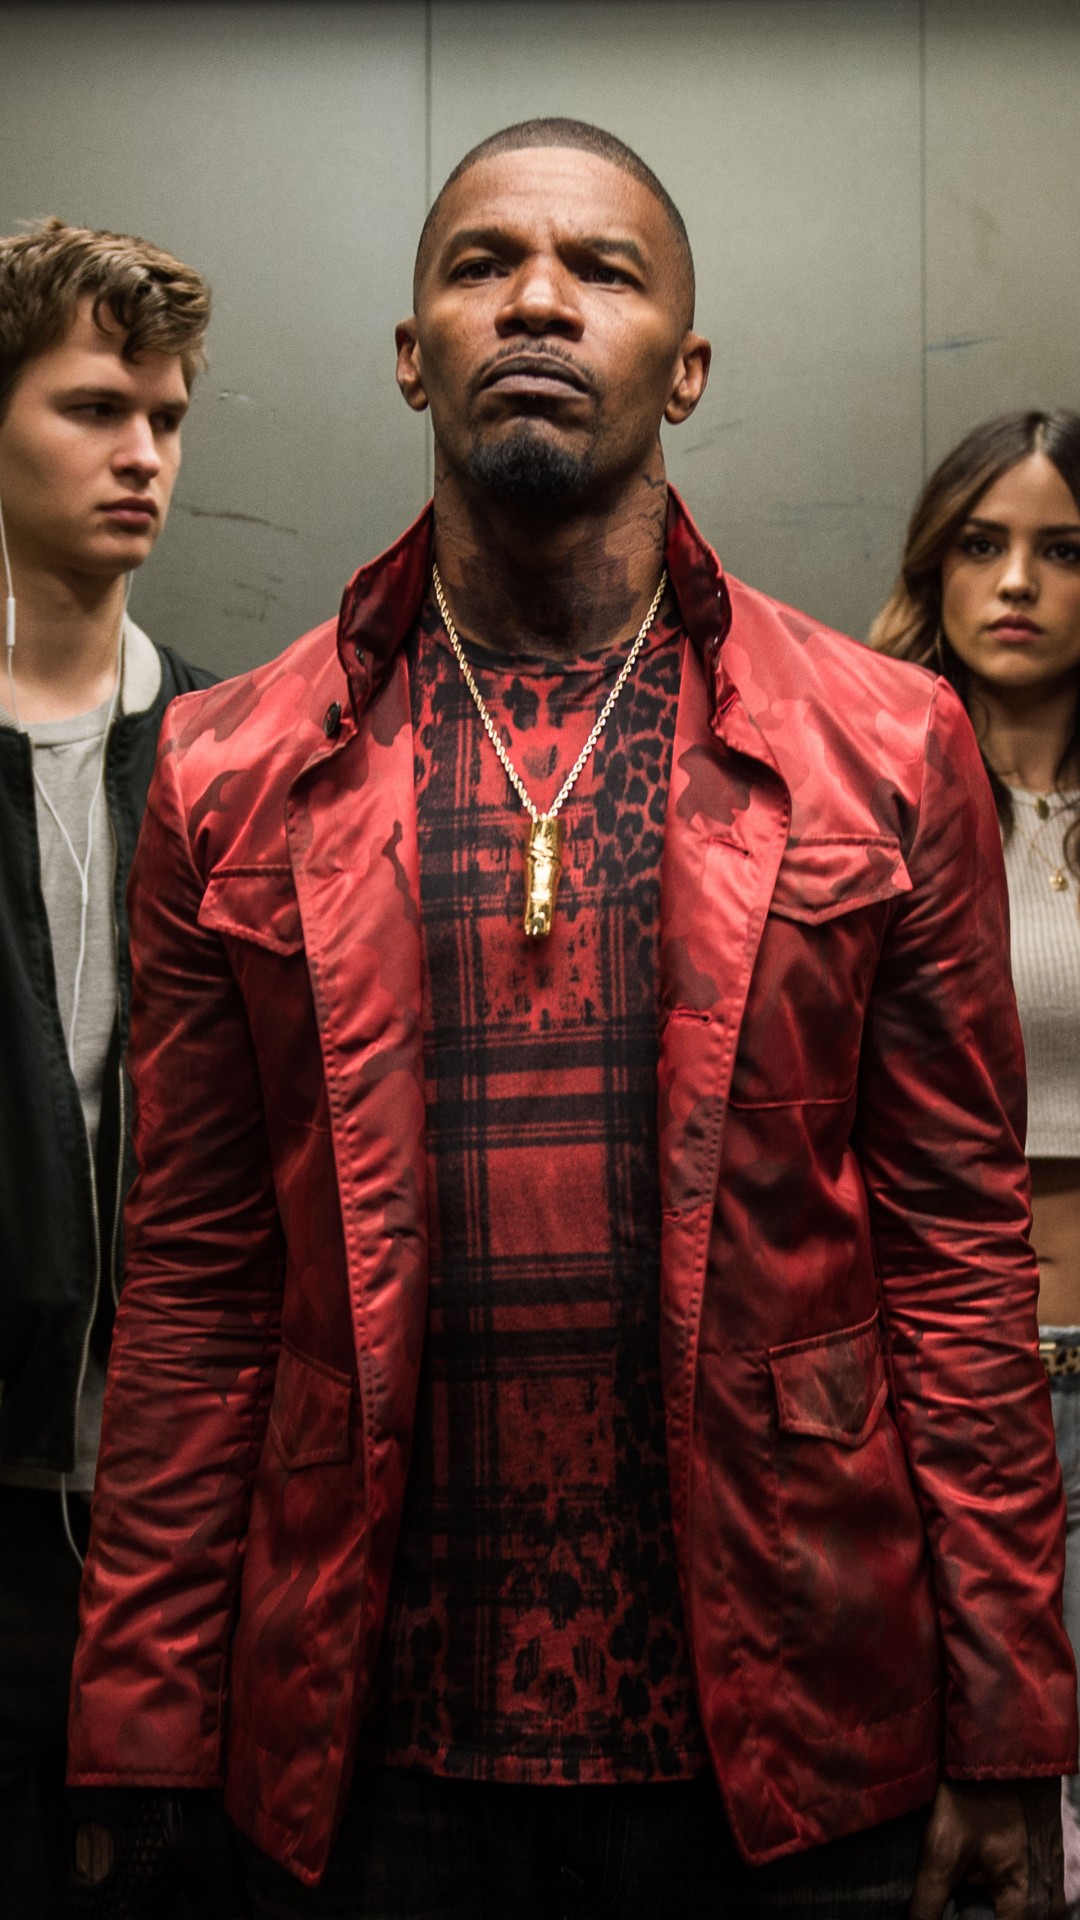 Eiza Gonzalez And Jon Hamm In Baby Driver Wallpapers